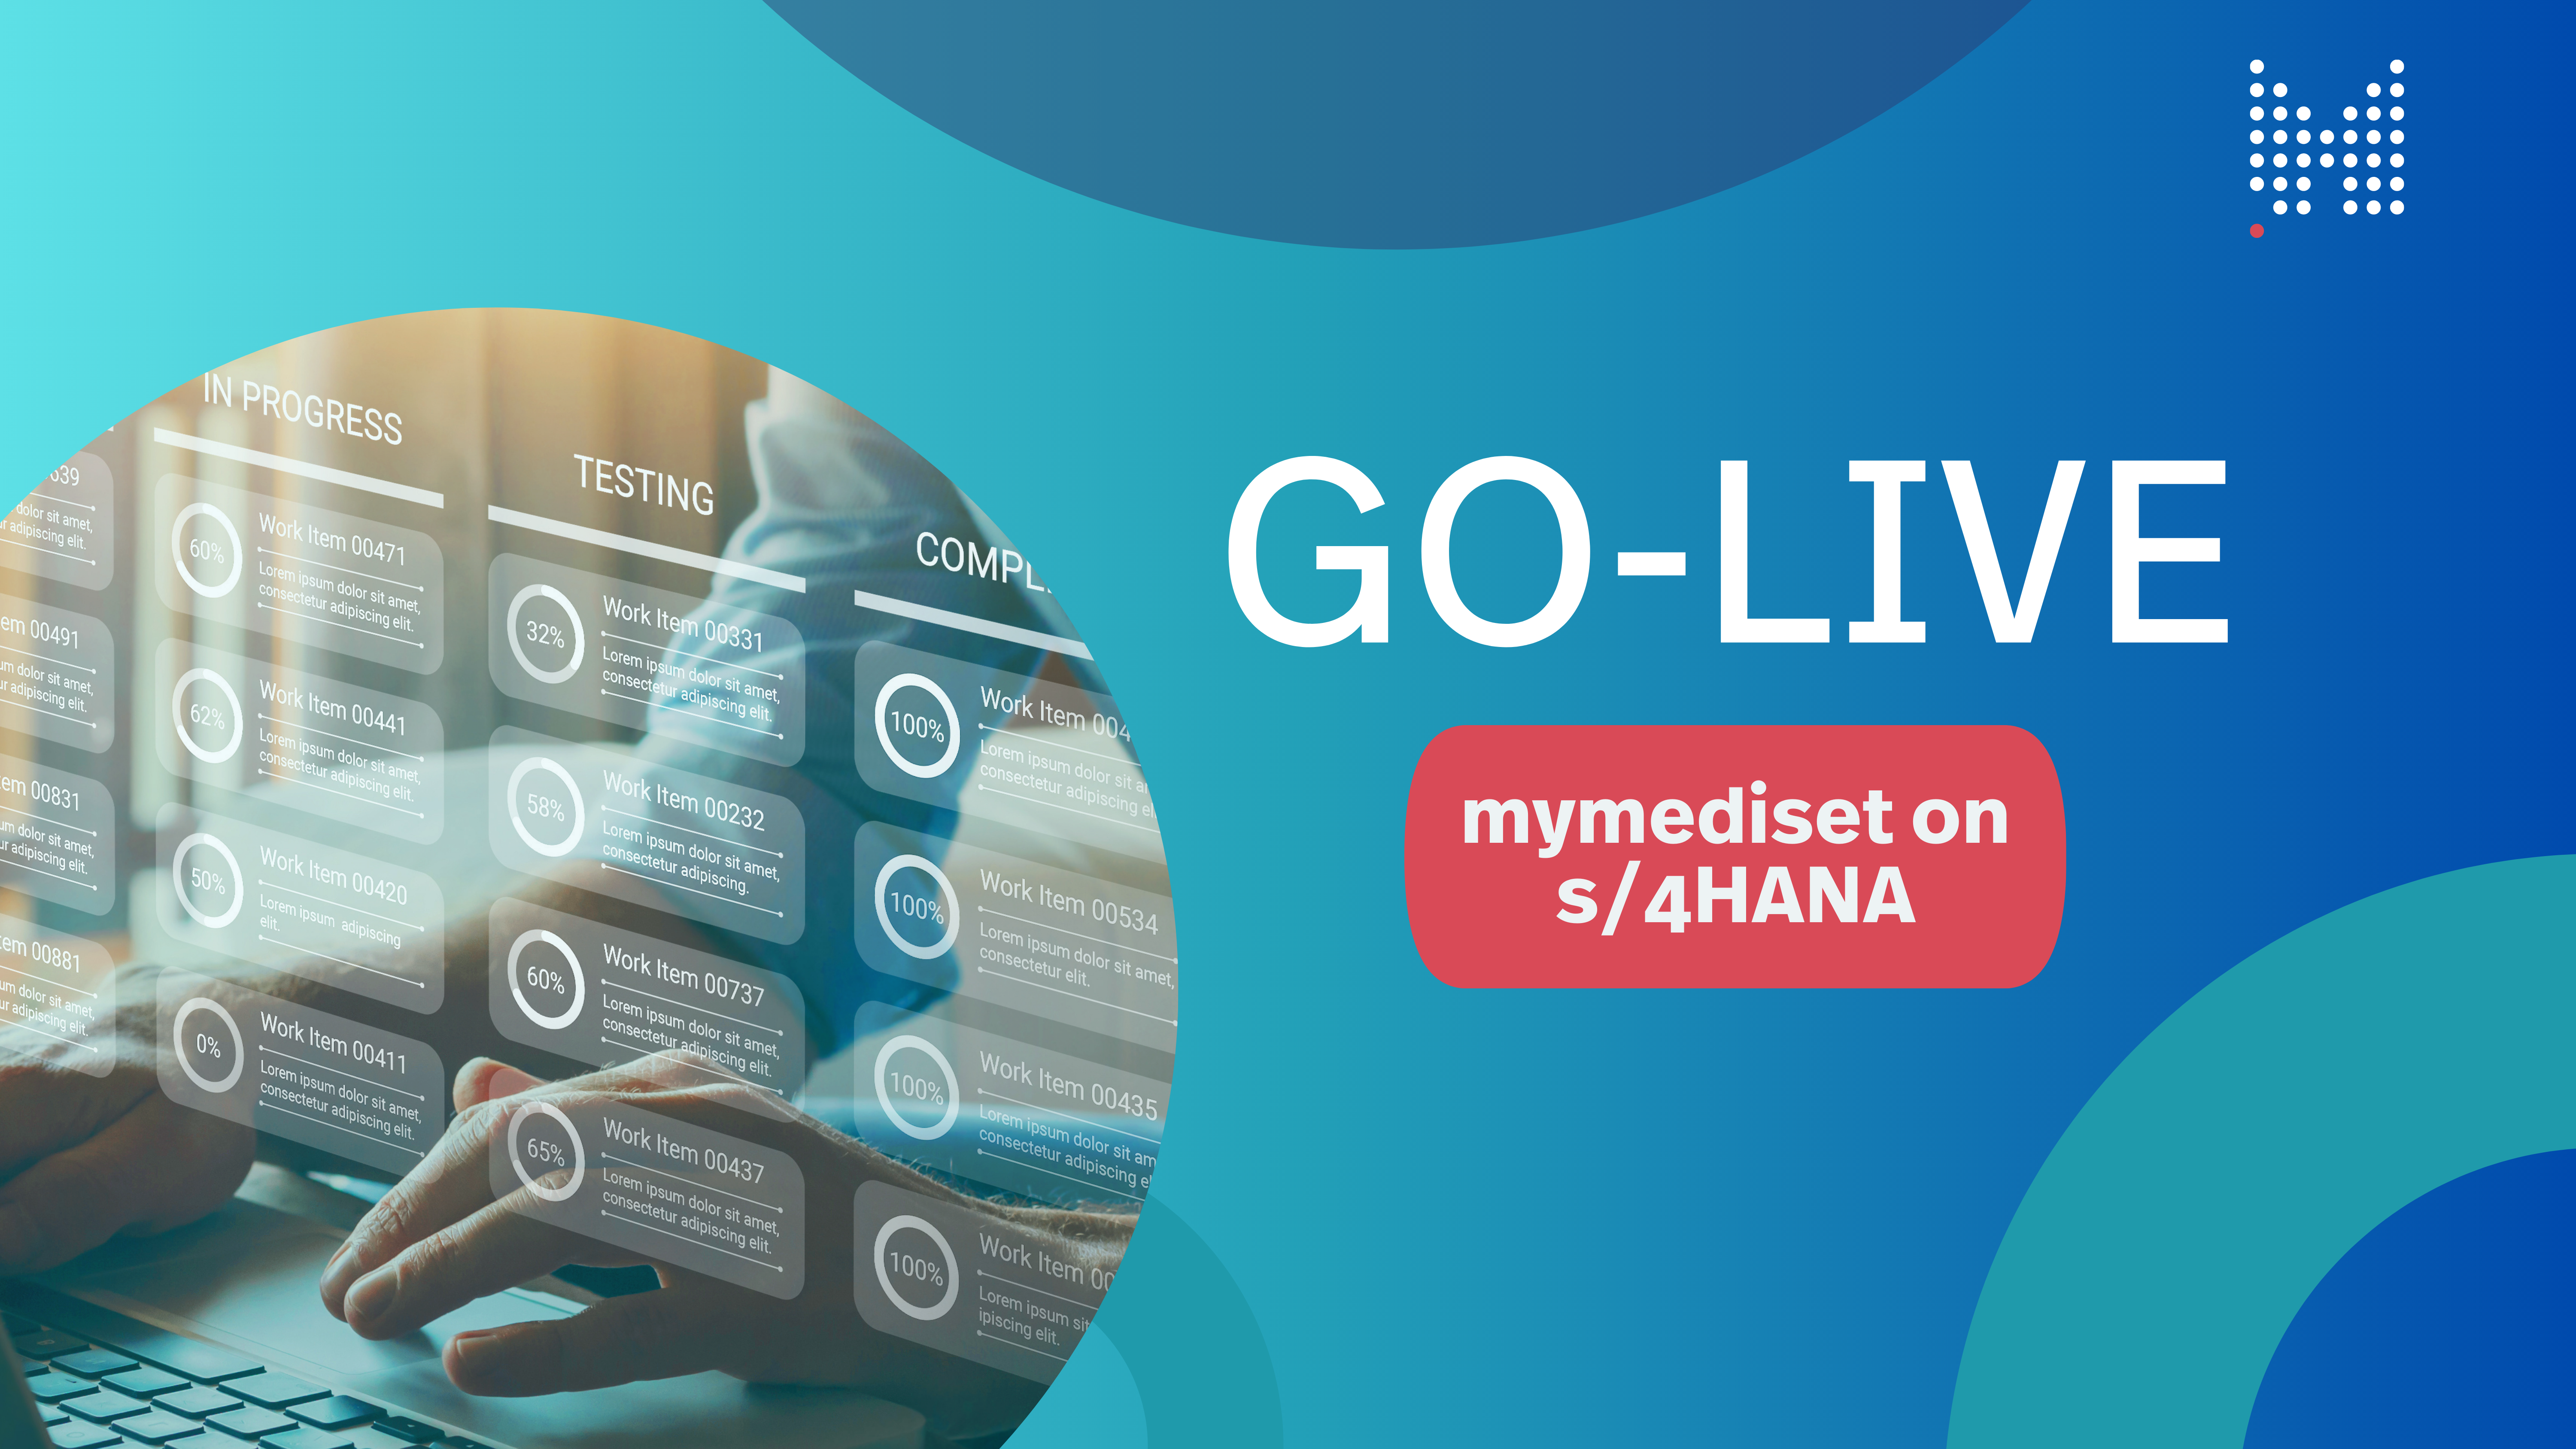 Go-Live at Johnson & Johnson in the UK